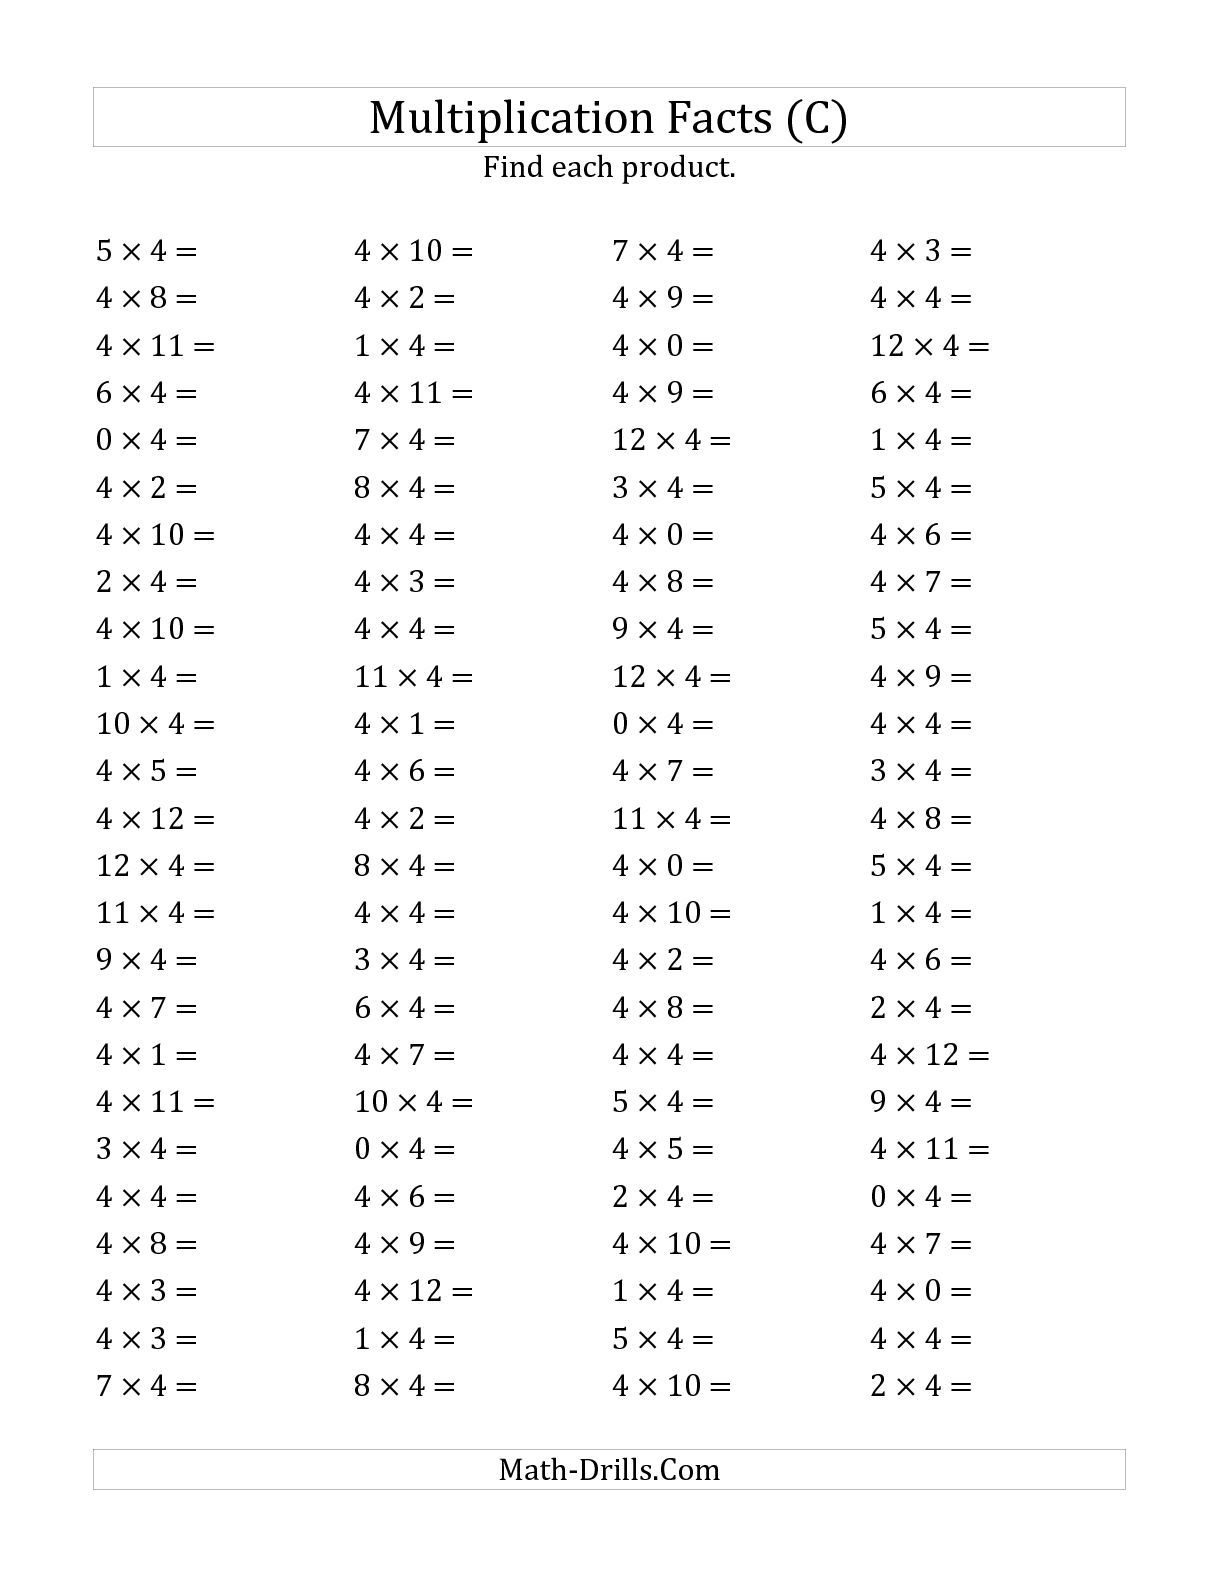 5-times-table-worksheets-pdf-multiplying-by-5-activities-multiplication-test-multiples-up-to